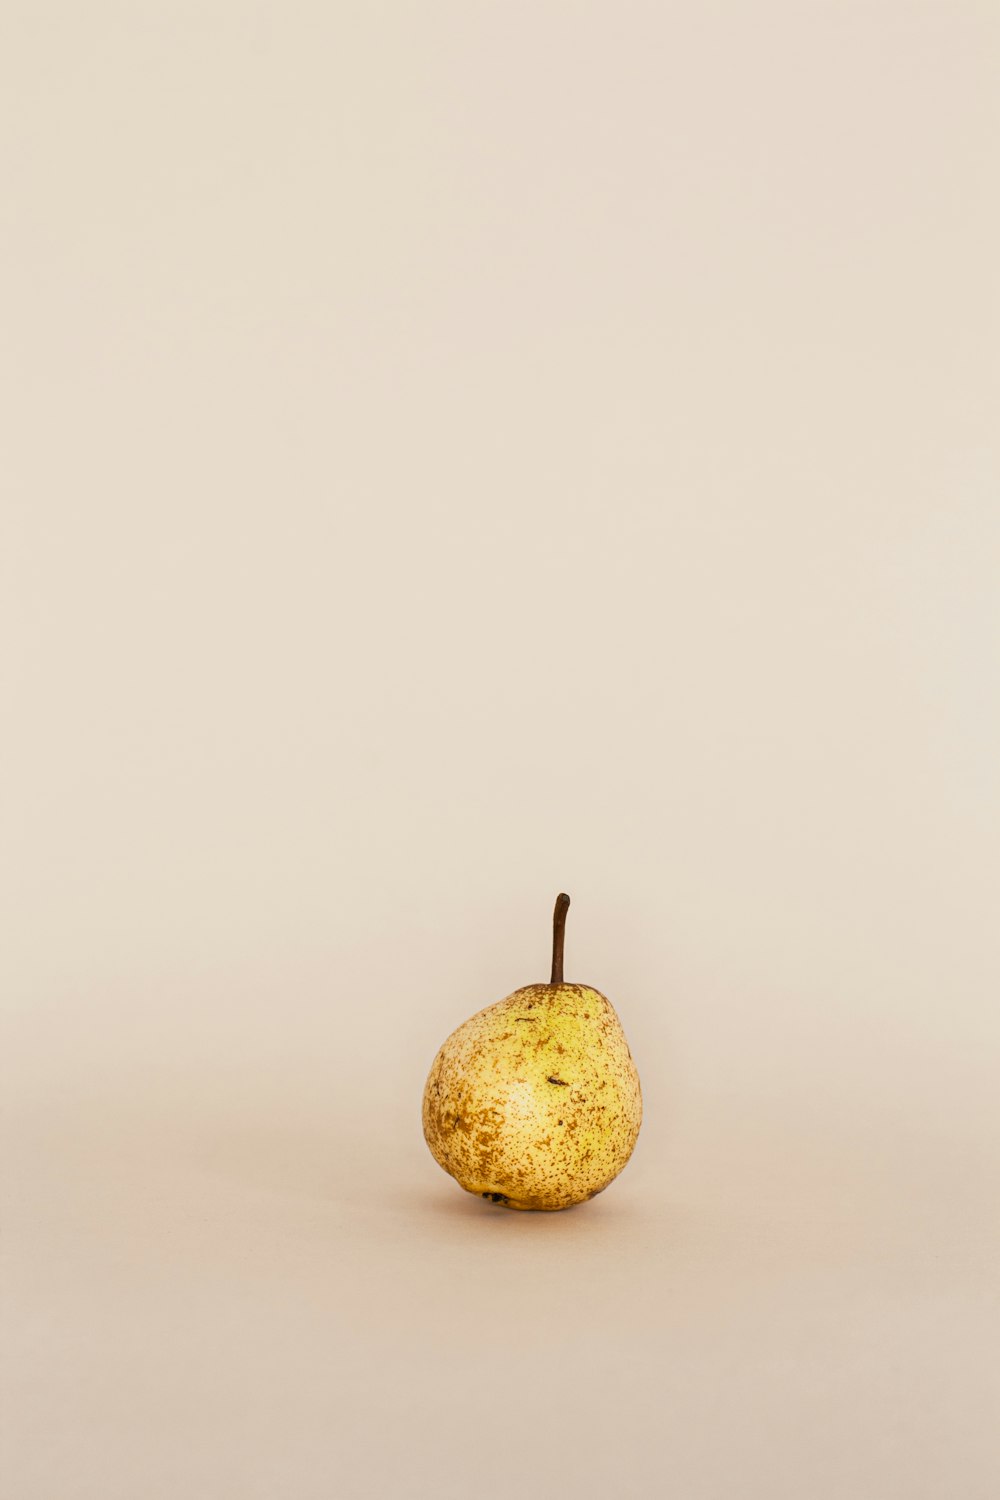 a single pear sitting on a white surface